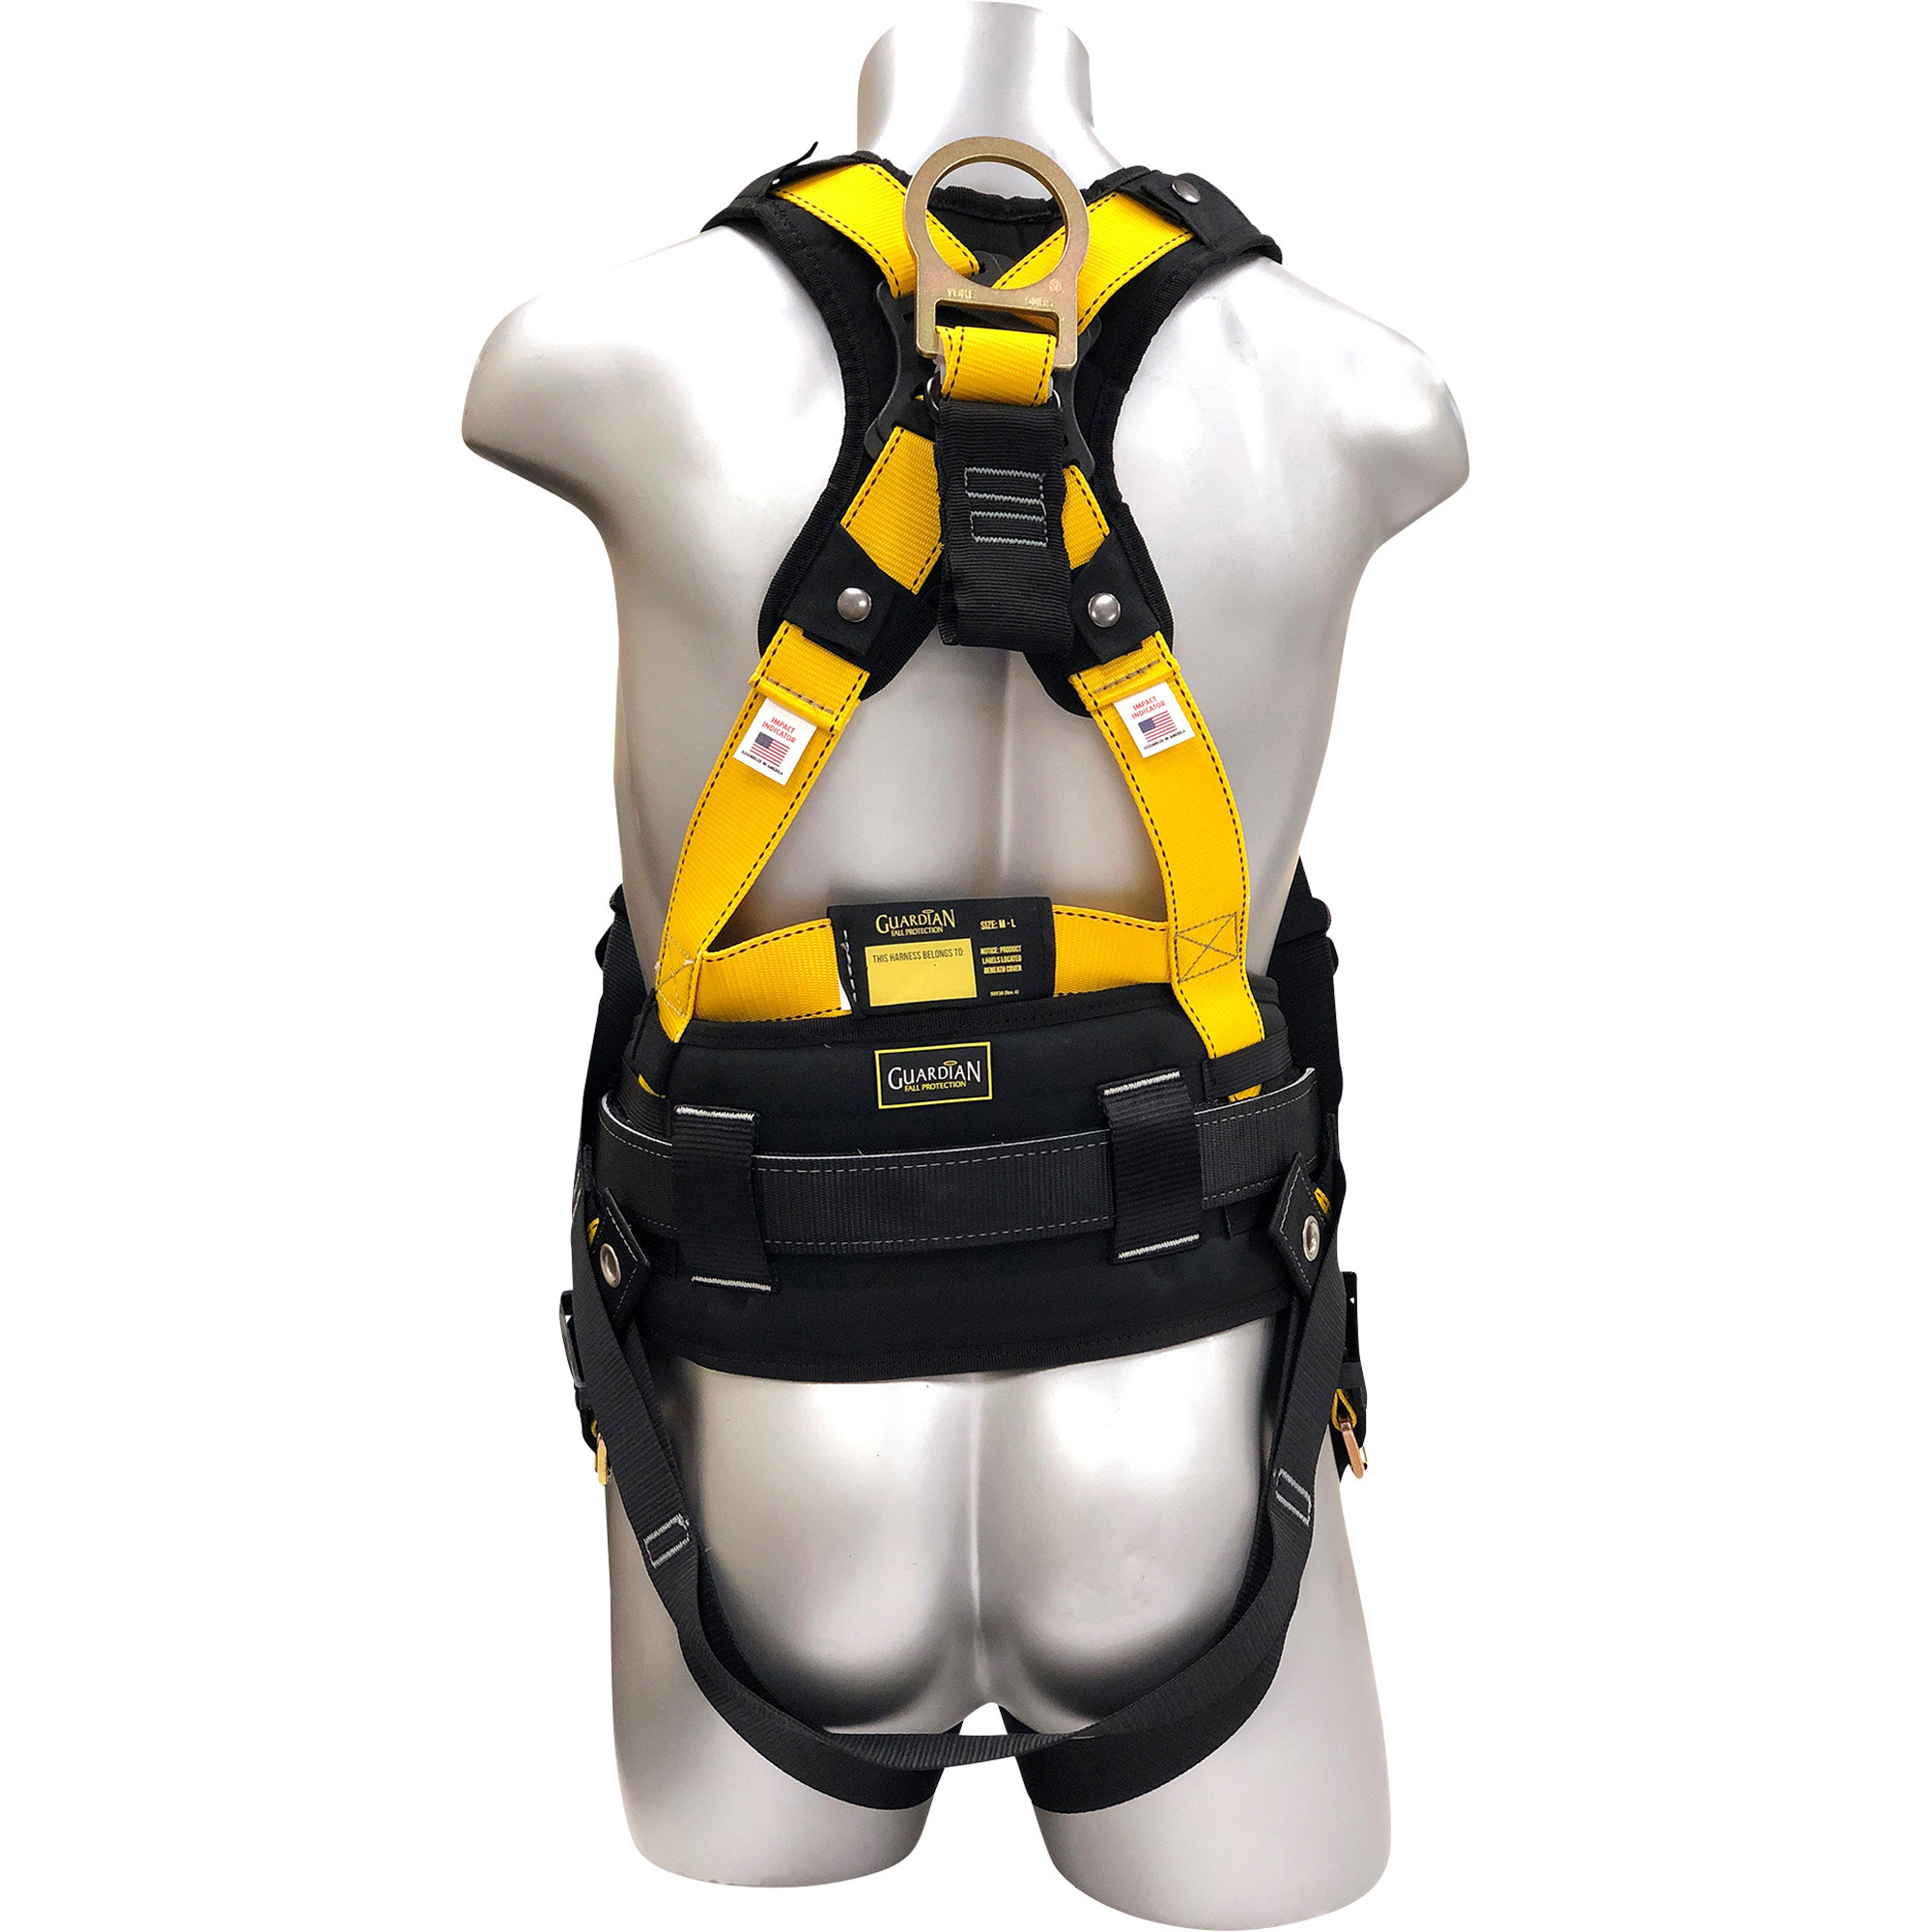 Guardian Fall Protection Series 3 Full Body Safety Harness with Waist Pad, XS/Small, Model 37192S